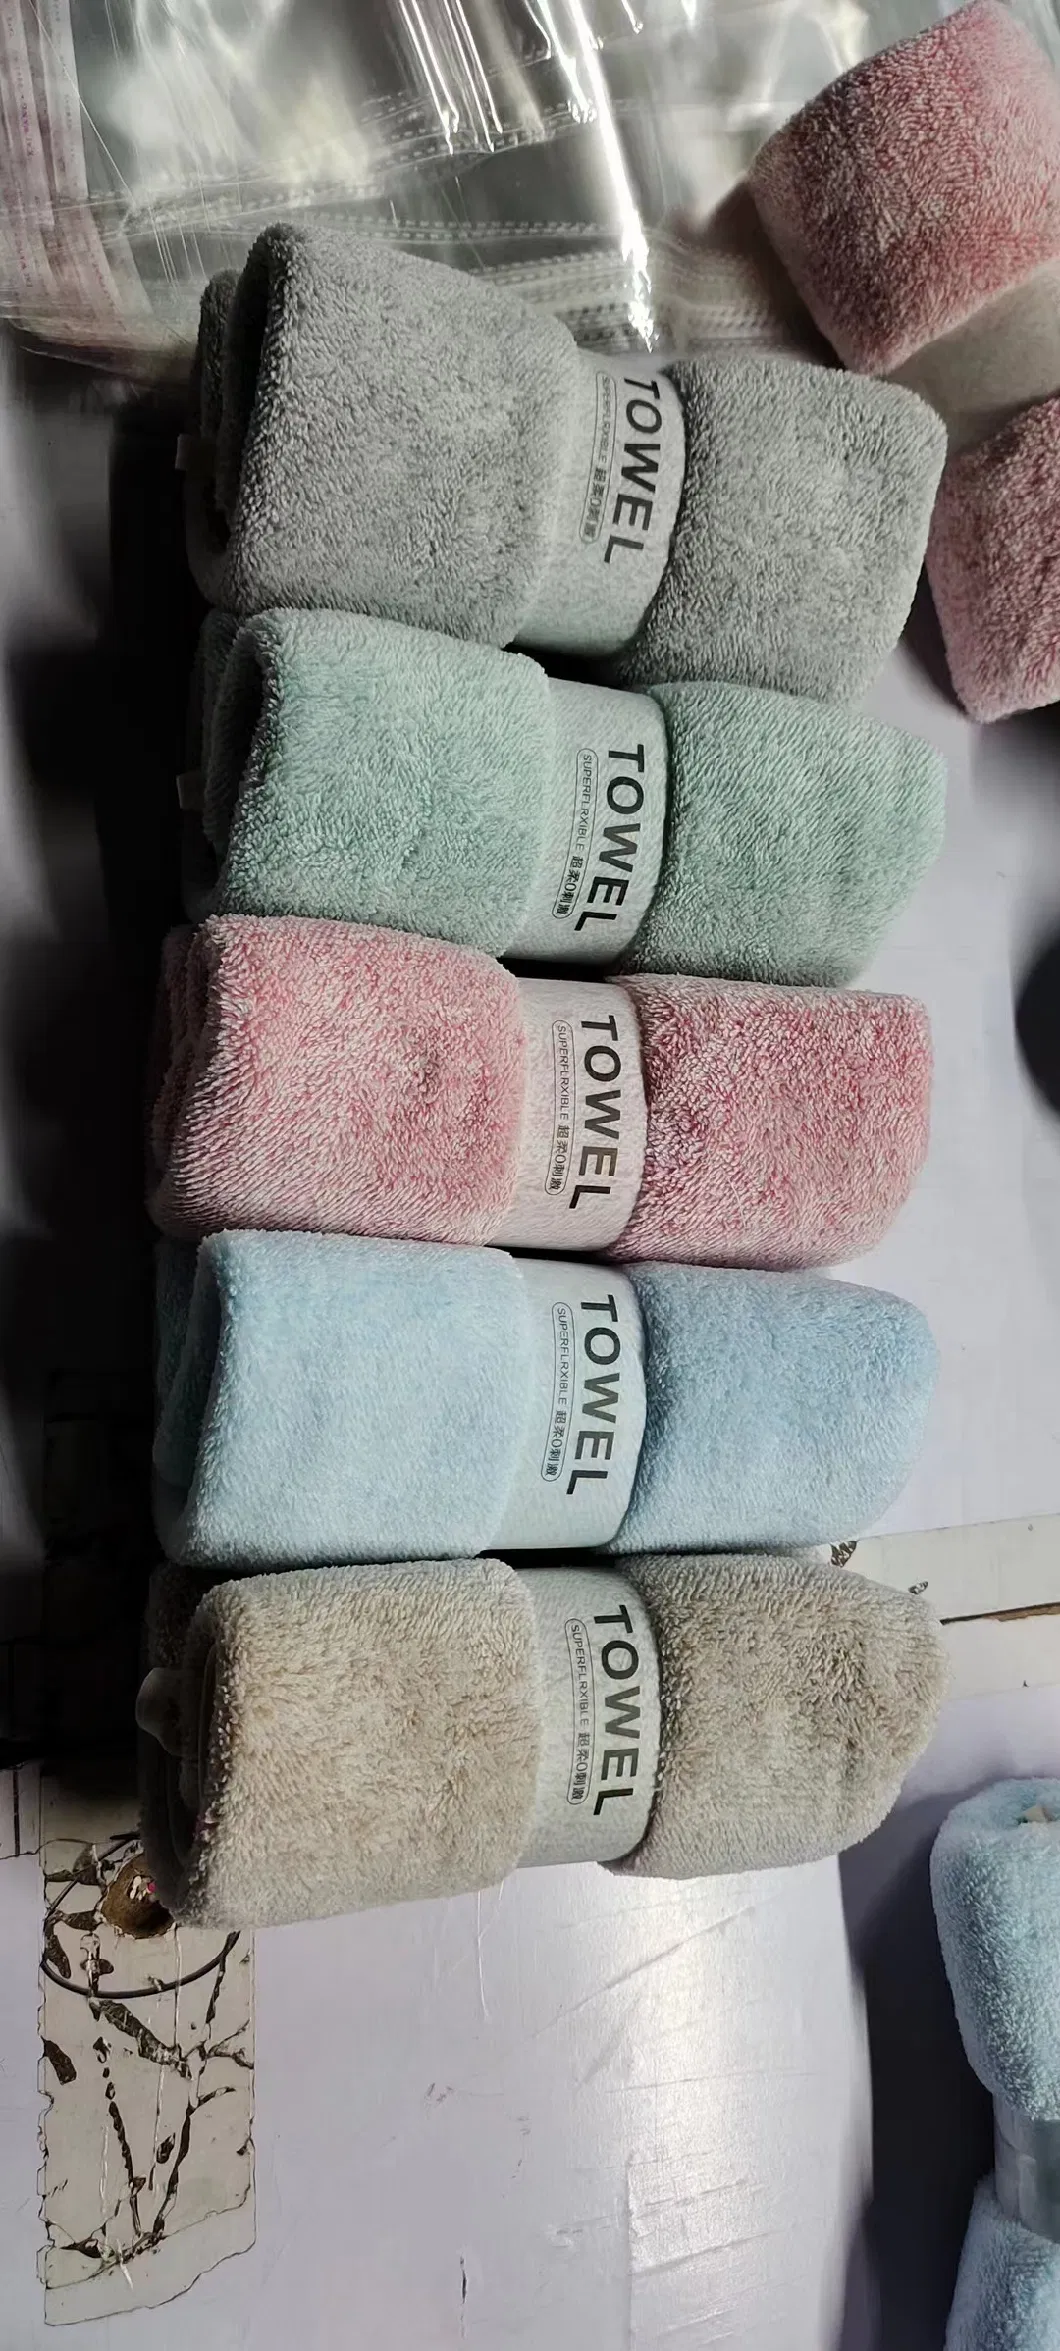 Embroidery Towels Bath 100% Cotton Luxury Hotel Bath Towels Hand Towel Bath Towel Hand Towel Set Plain Terry 100% Cotton Sports Towel